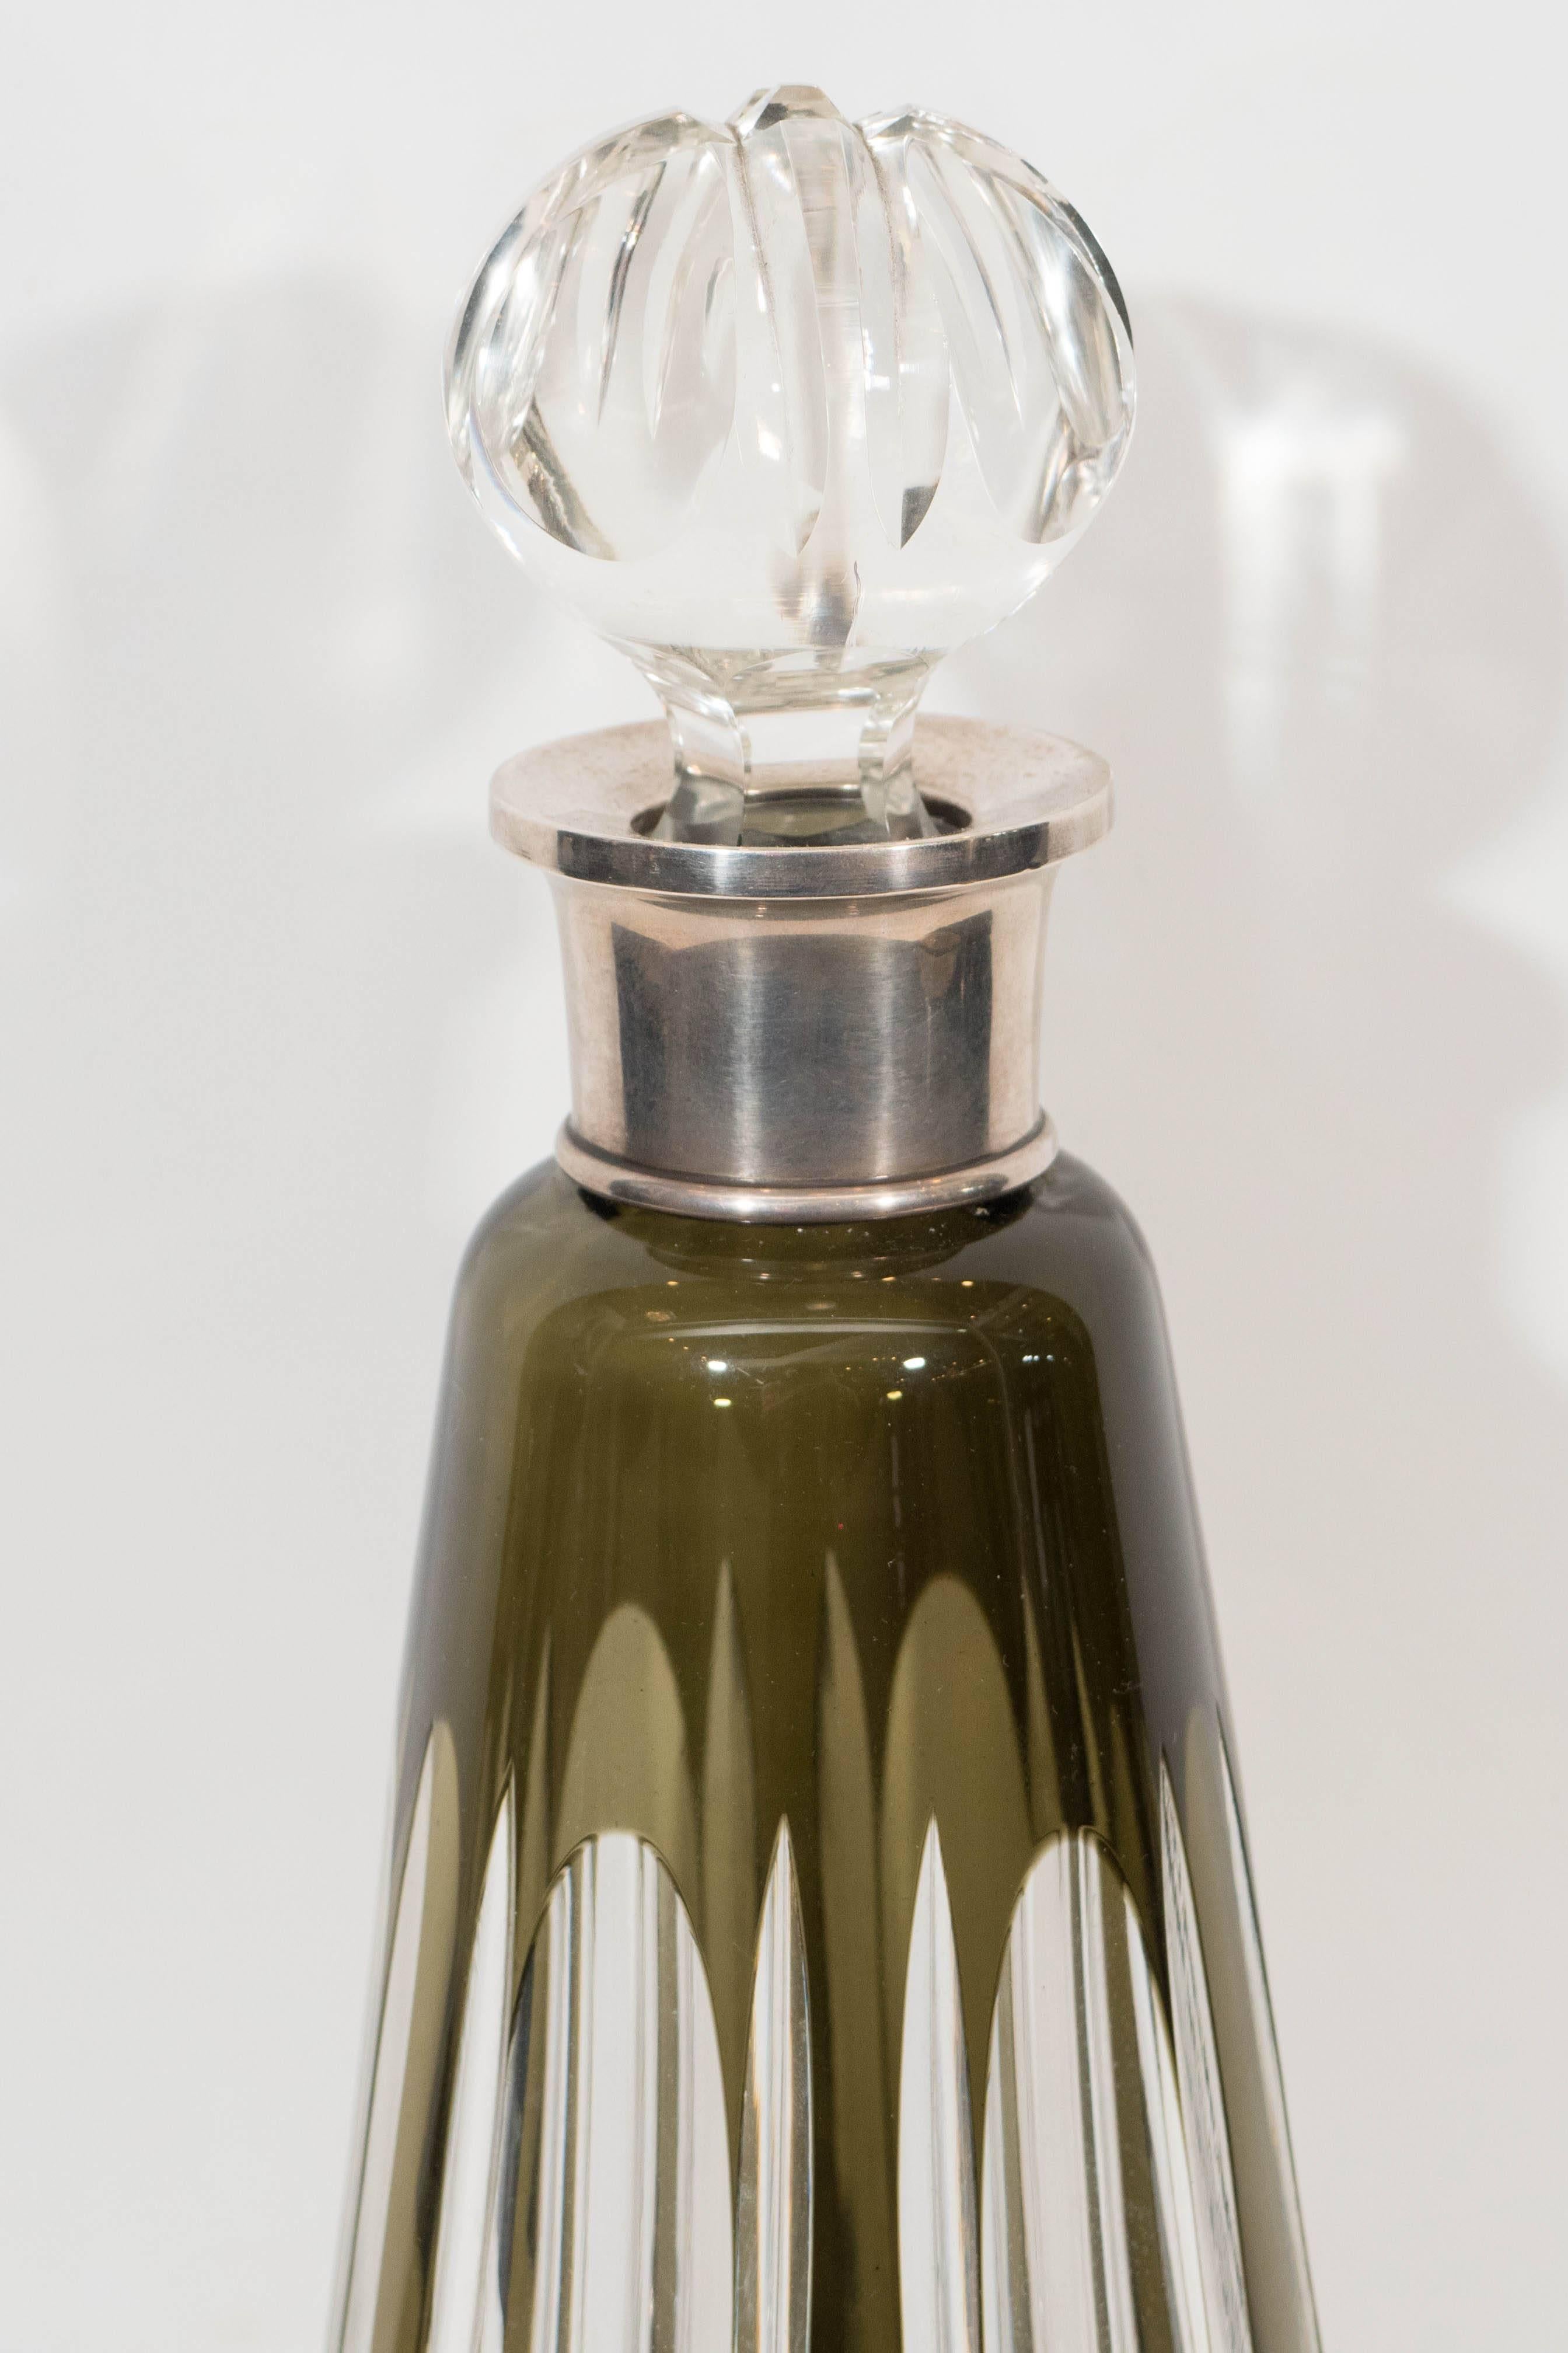 An Argentinian cut crystal decanter with black overlay, produced circa 1970s, including round, cut-glass stopper and sterling silver neck band. Markings include hallmarks, indicative of Industria Argentina [IN.ARGENTINA] and sterling silver